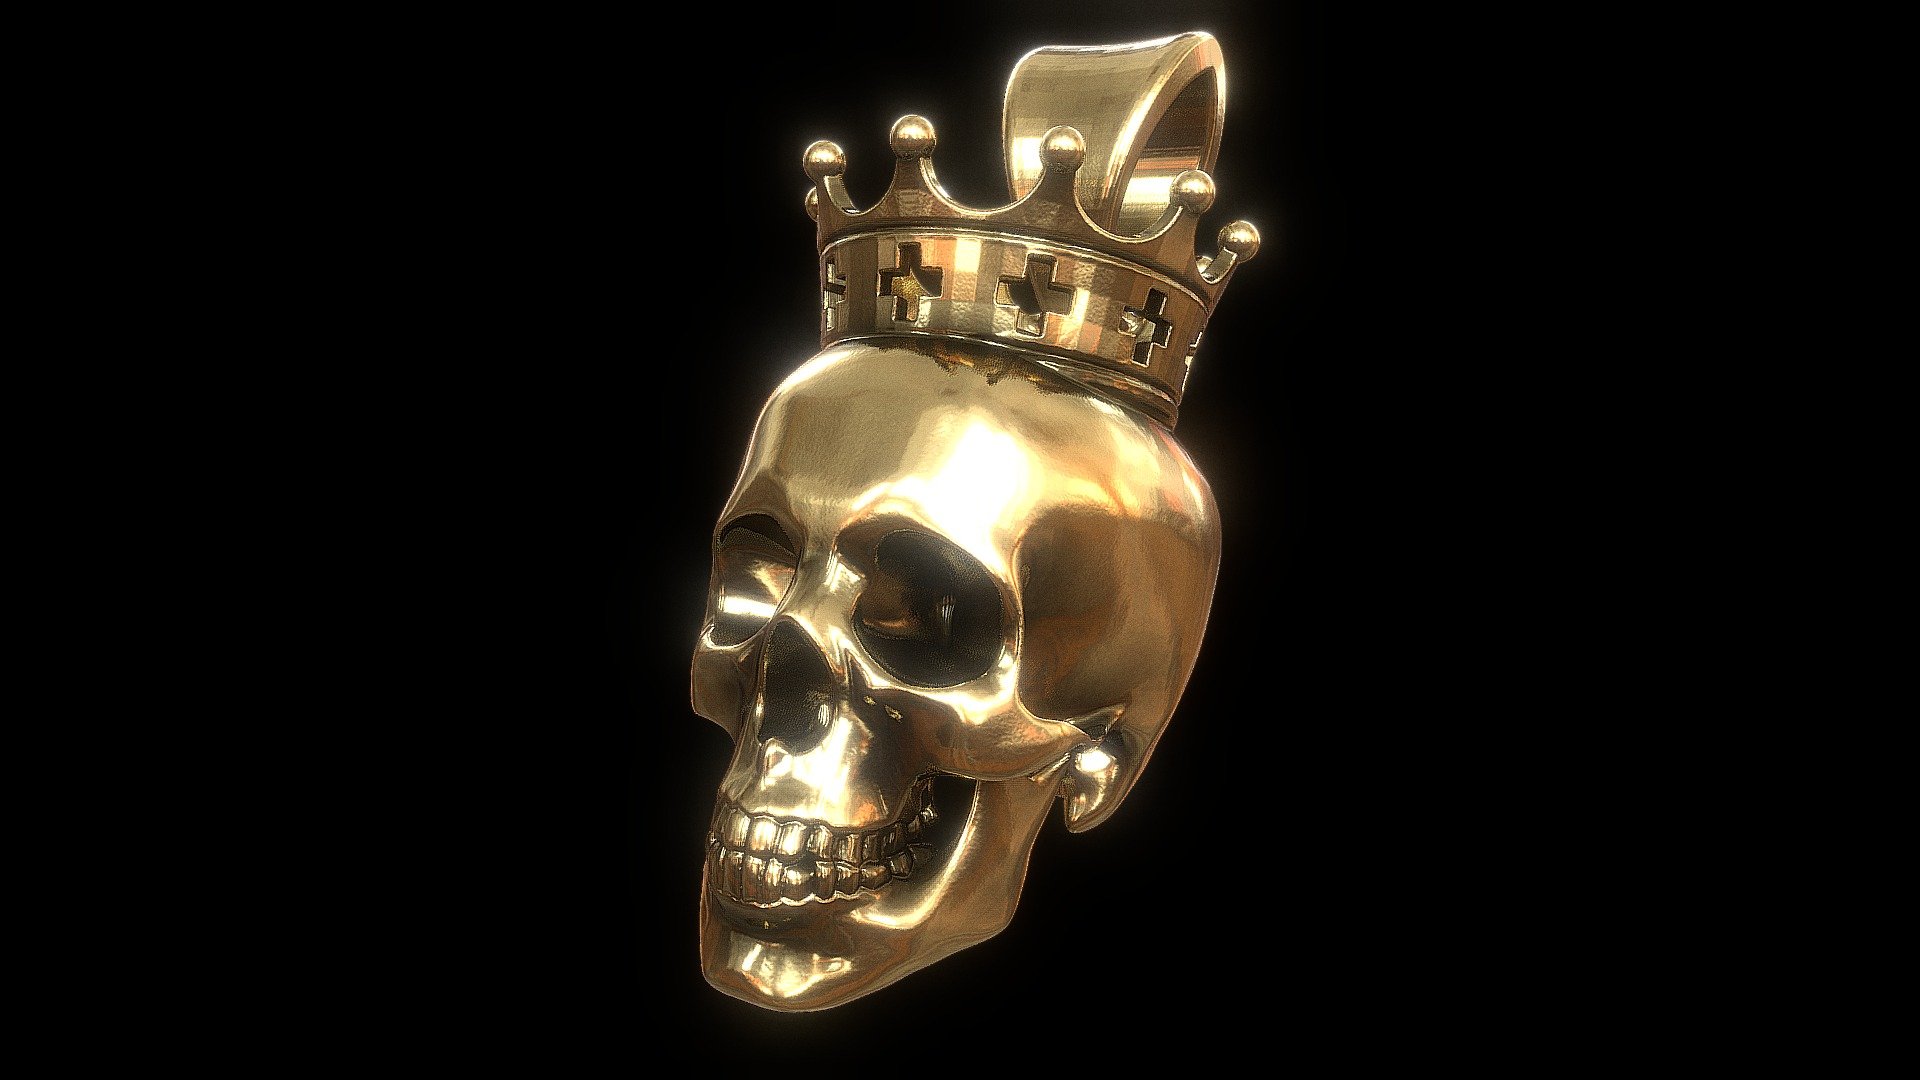 Hey everyone

This is a dead king pendant I made using Zbrush, Rhino and Solidworks

Hope you will appreciate it

You can visit my instagram here :

https://www.instagram.com/3dm.design/?hl=fr - Dead King Pendant - 3D model by 3DM Design (@3dmdesign) 3d model